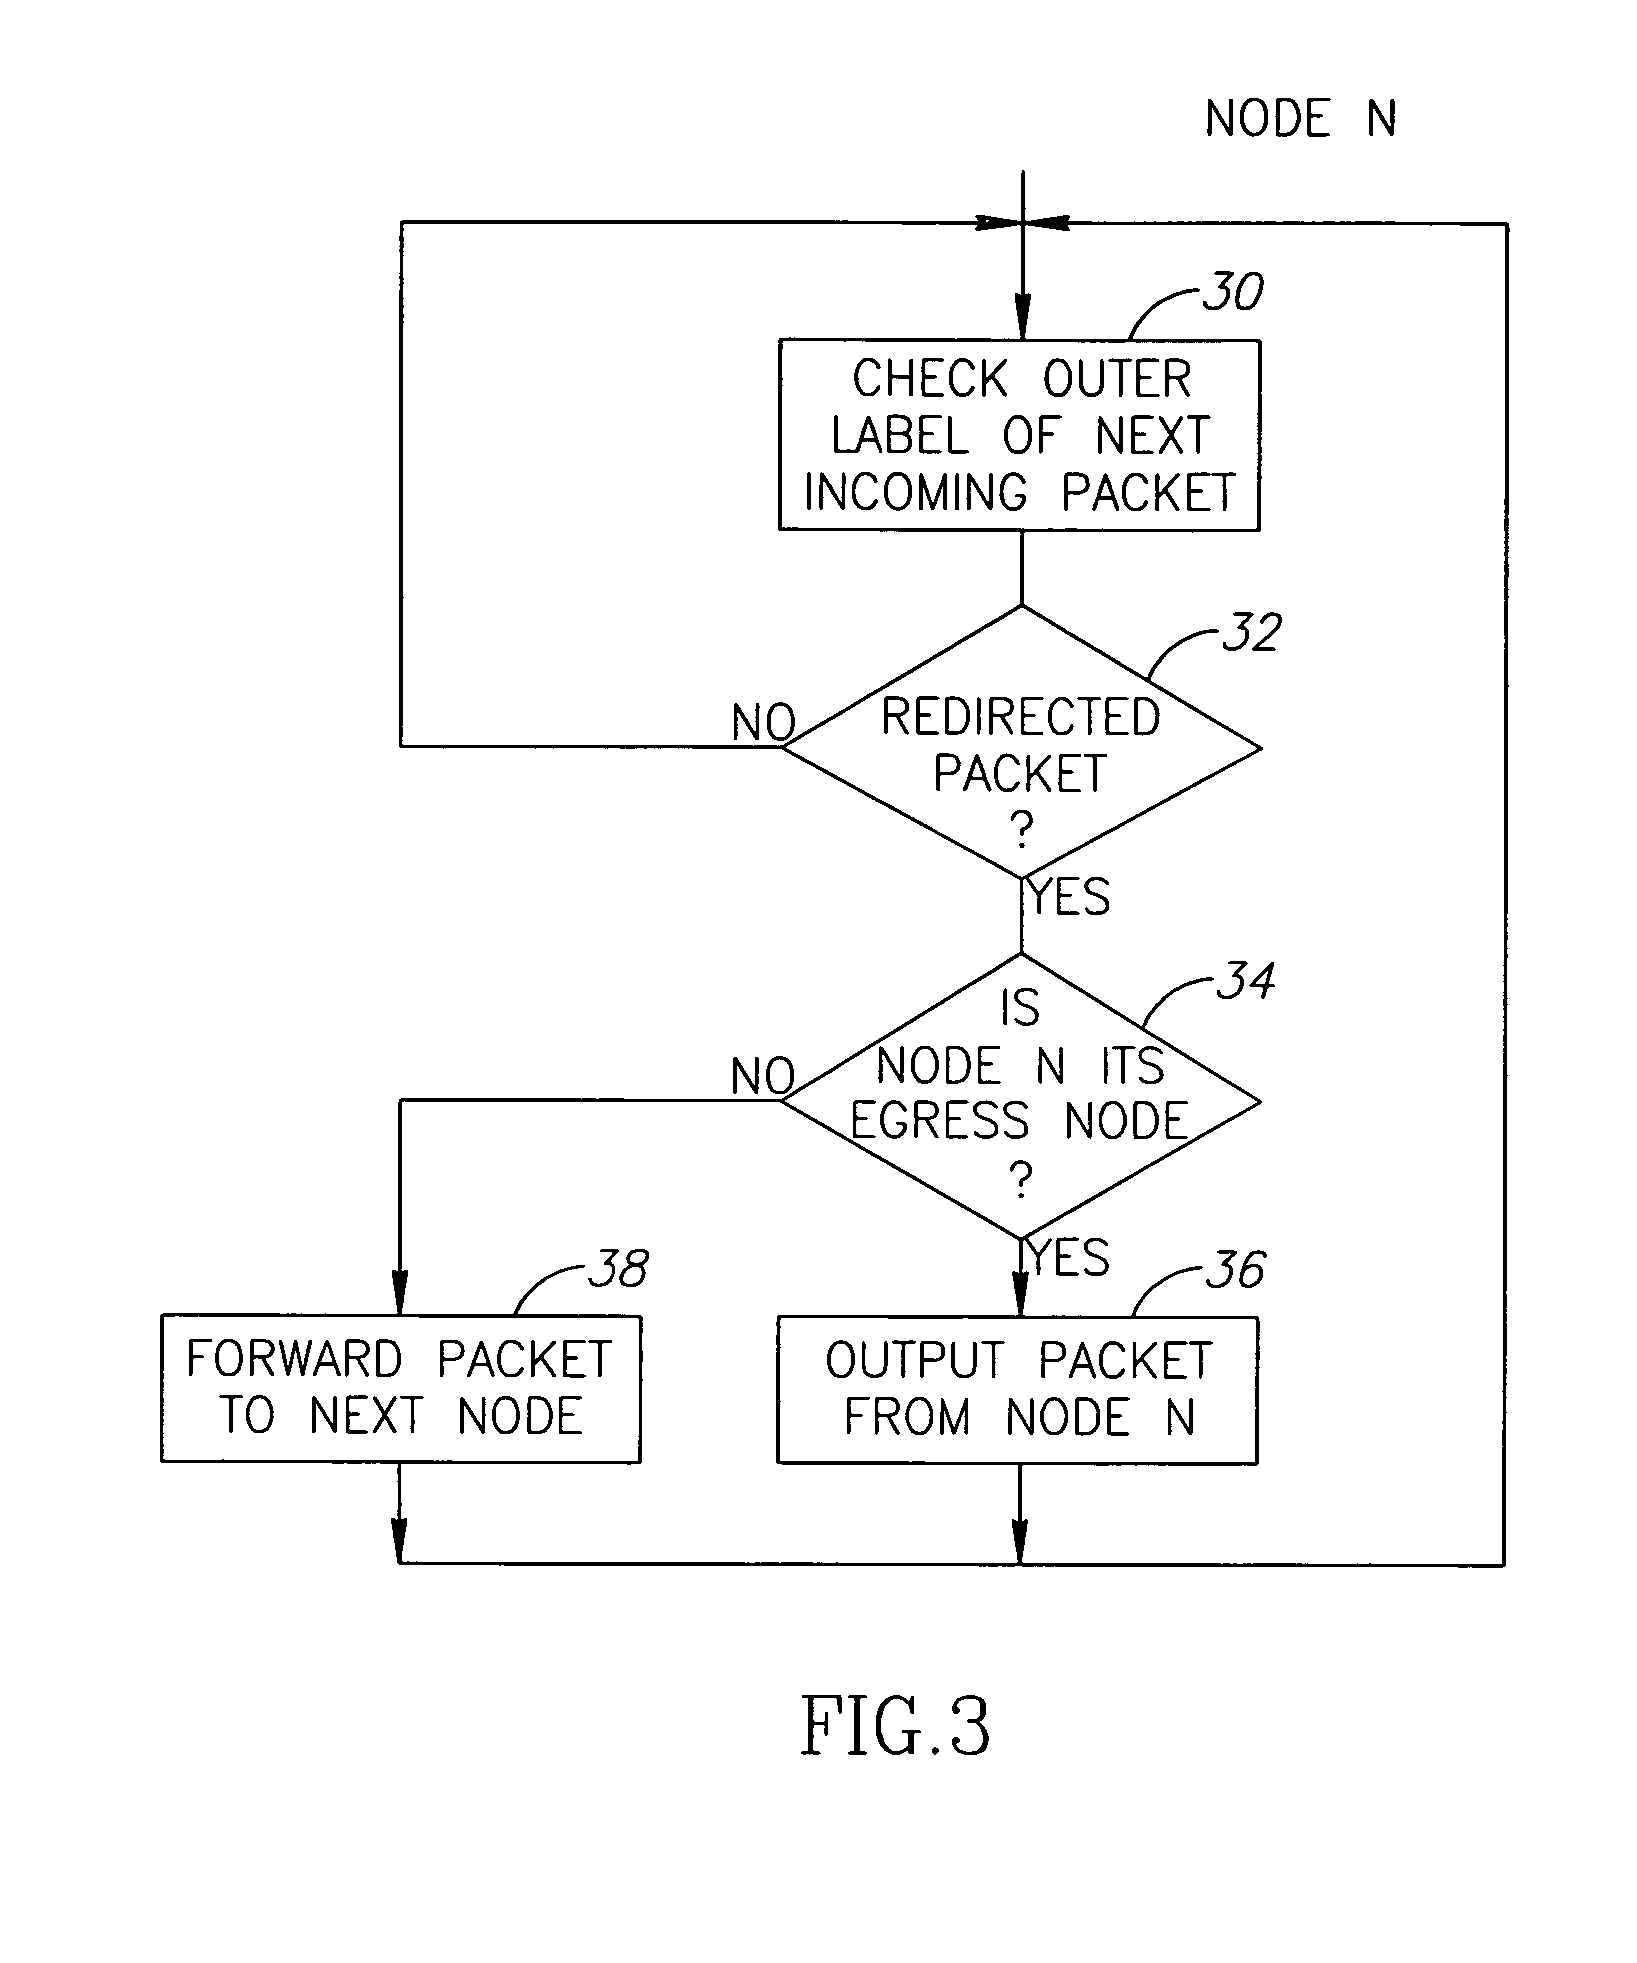 Method for rerouting MPLS traffic in ring networks